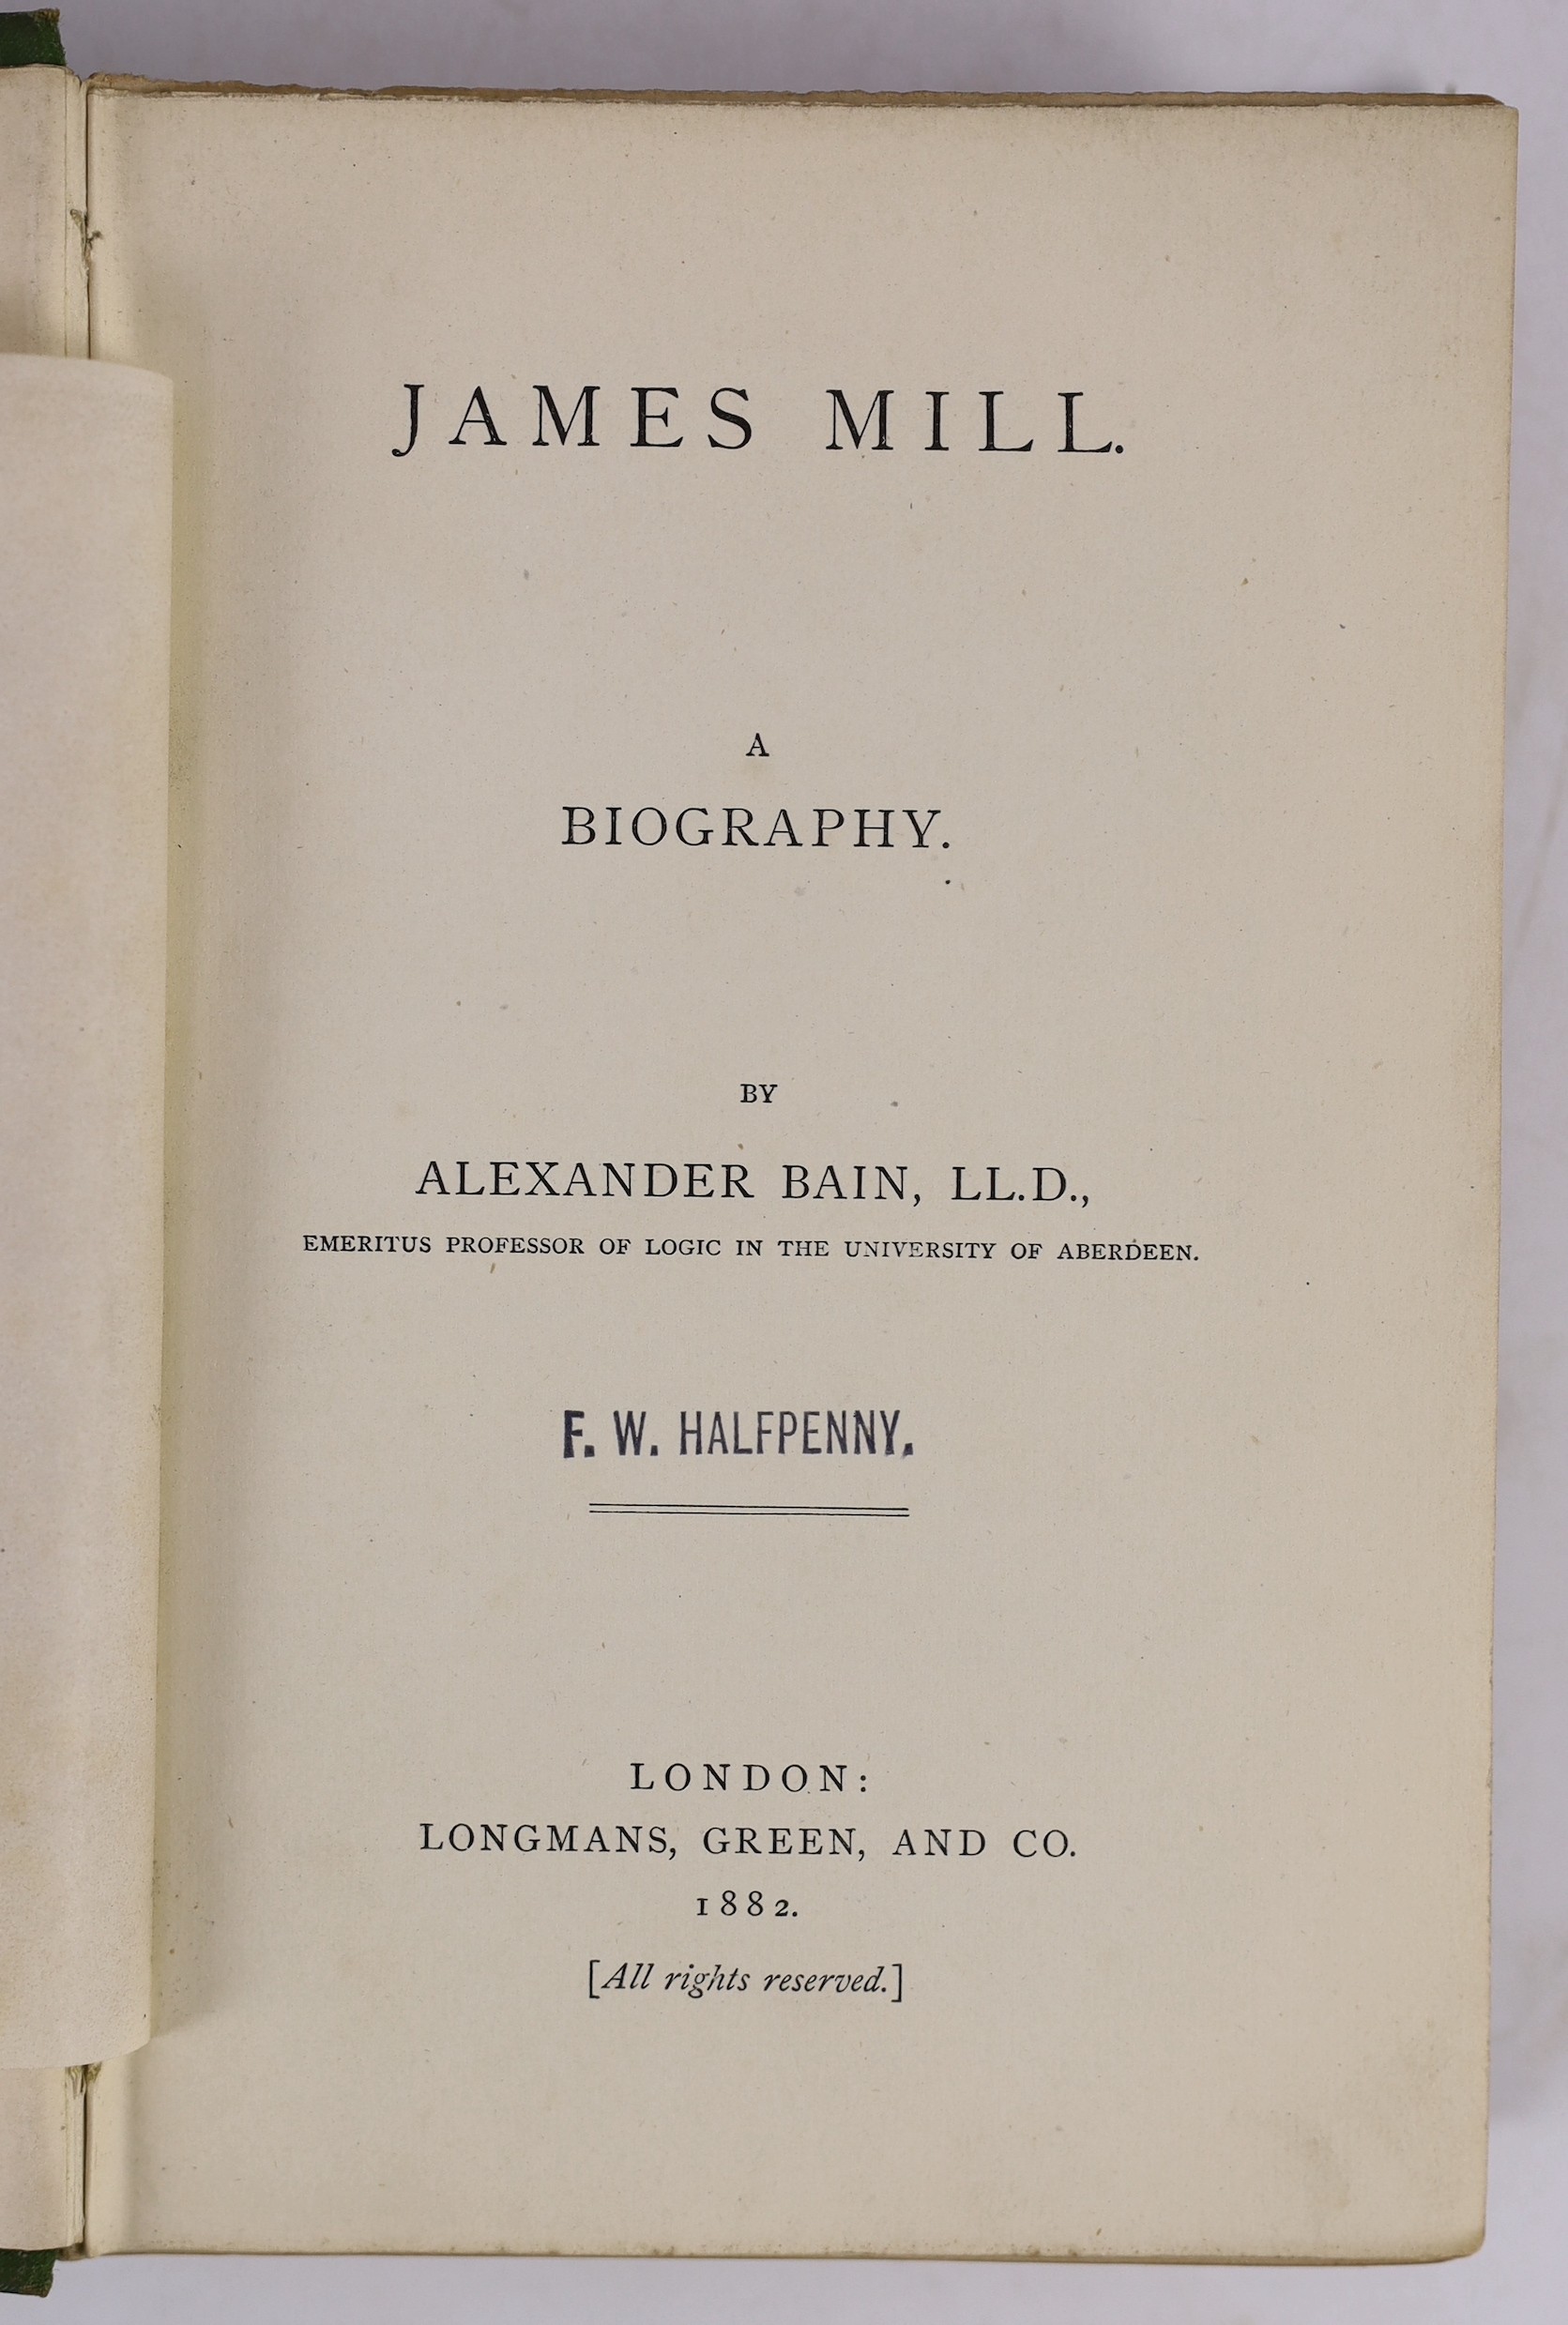 Mill, James - Elements of Political Economy. 3rd edition, revised and corrected. (?) later 19th cent. blind-decorated and gilt lettered cloth. 1826; Bain, Alexander - James Mill: a biography. portrait frontis., half titl